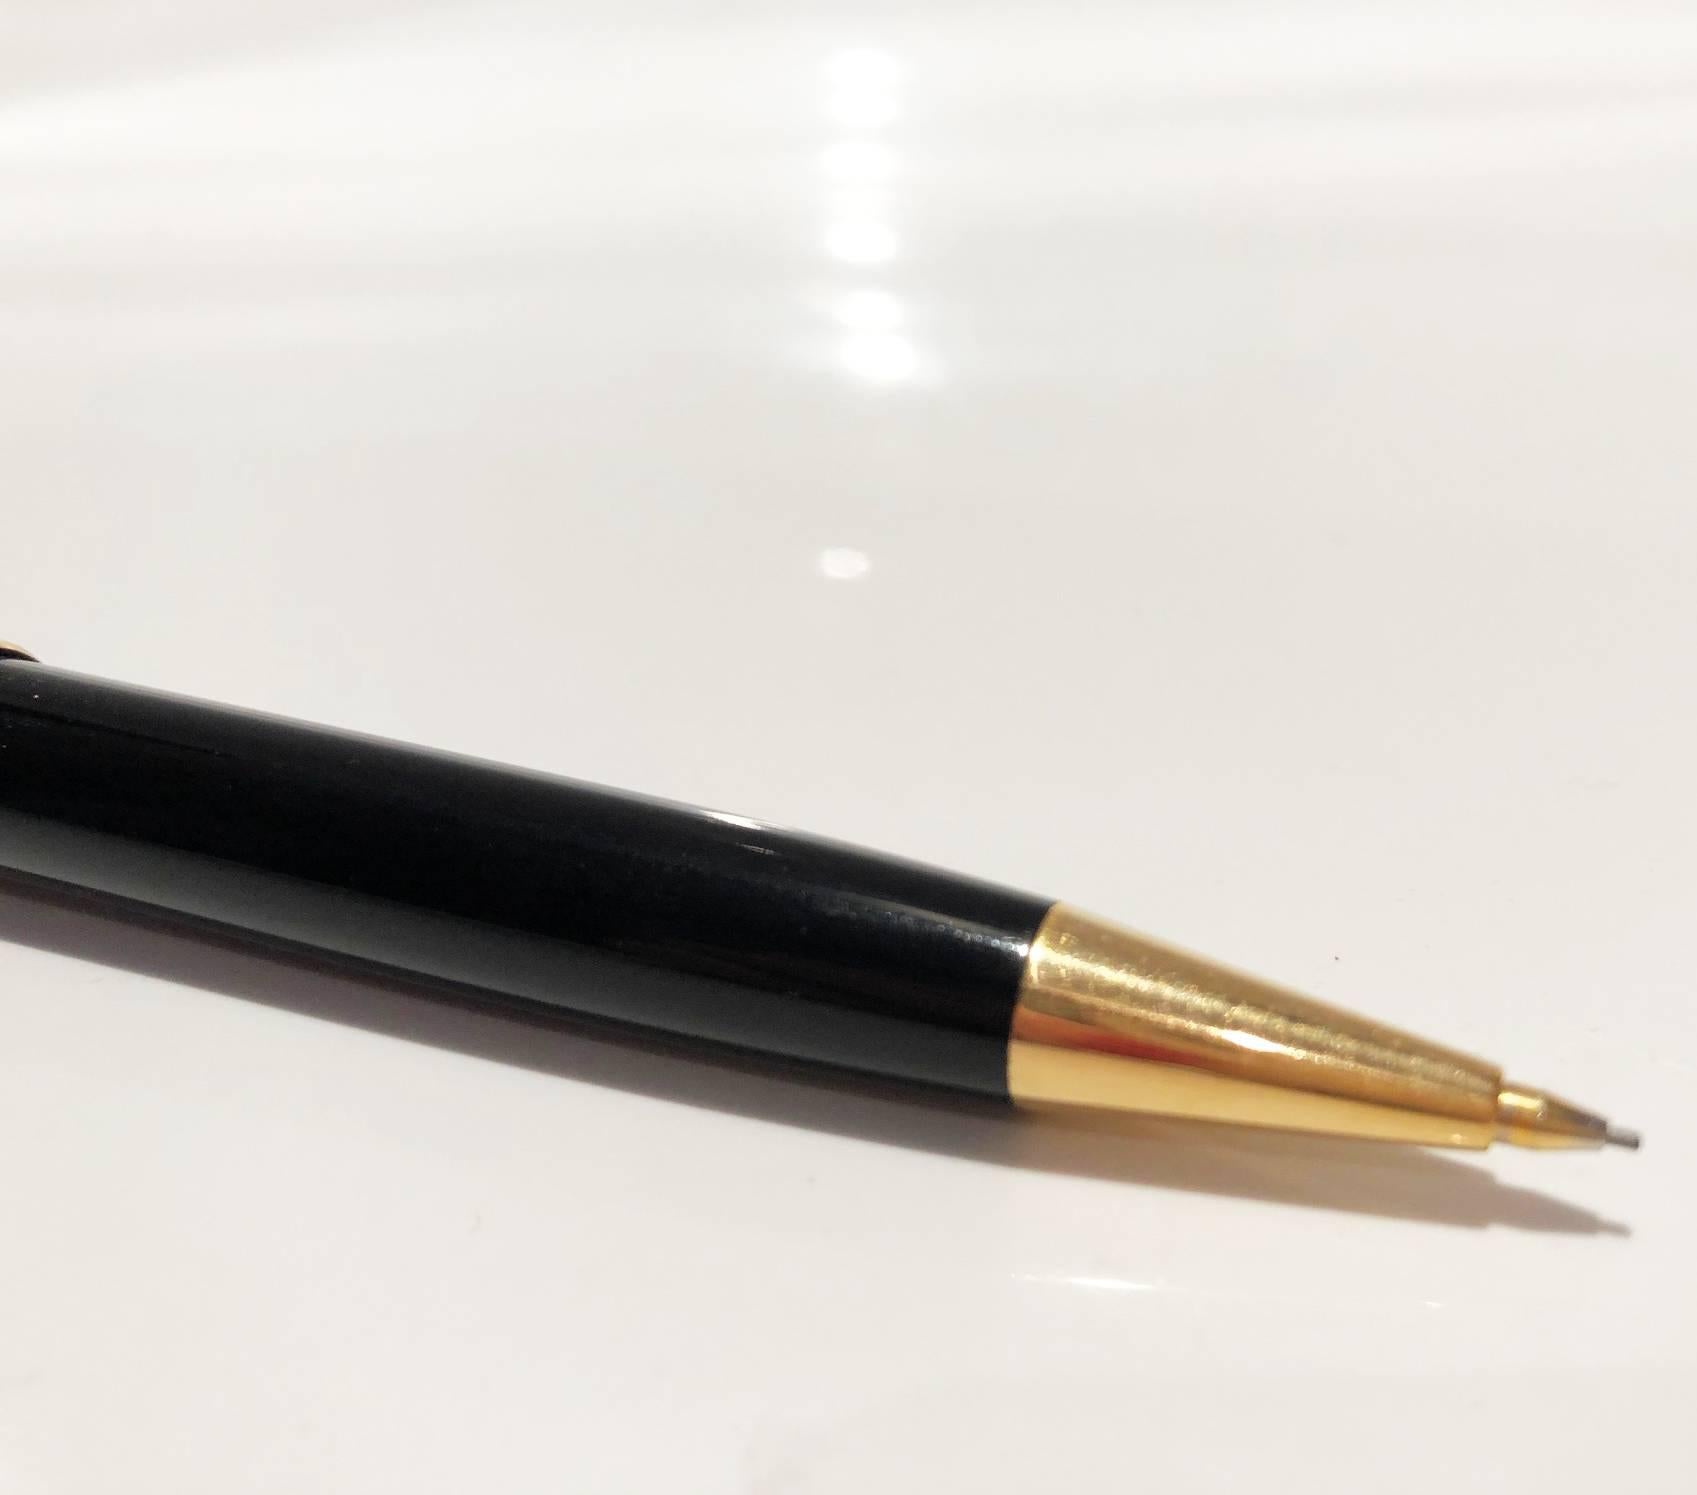 Meisterstück Gold-Coated Classique Mechanical Pencil, Gold-coated clip with individual serial number, Black precious resin, Black precious resin inlaid with Montblanc emblem
Condition: good working order, slight sign (barely visible) if usage but